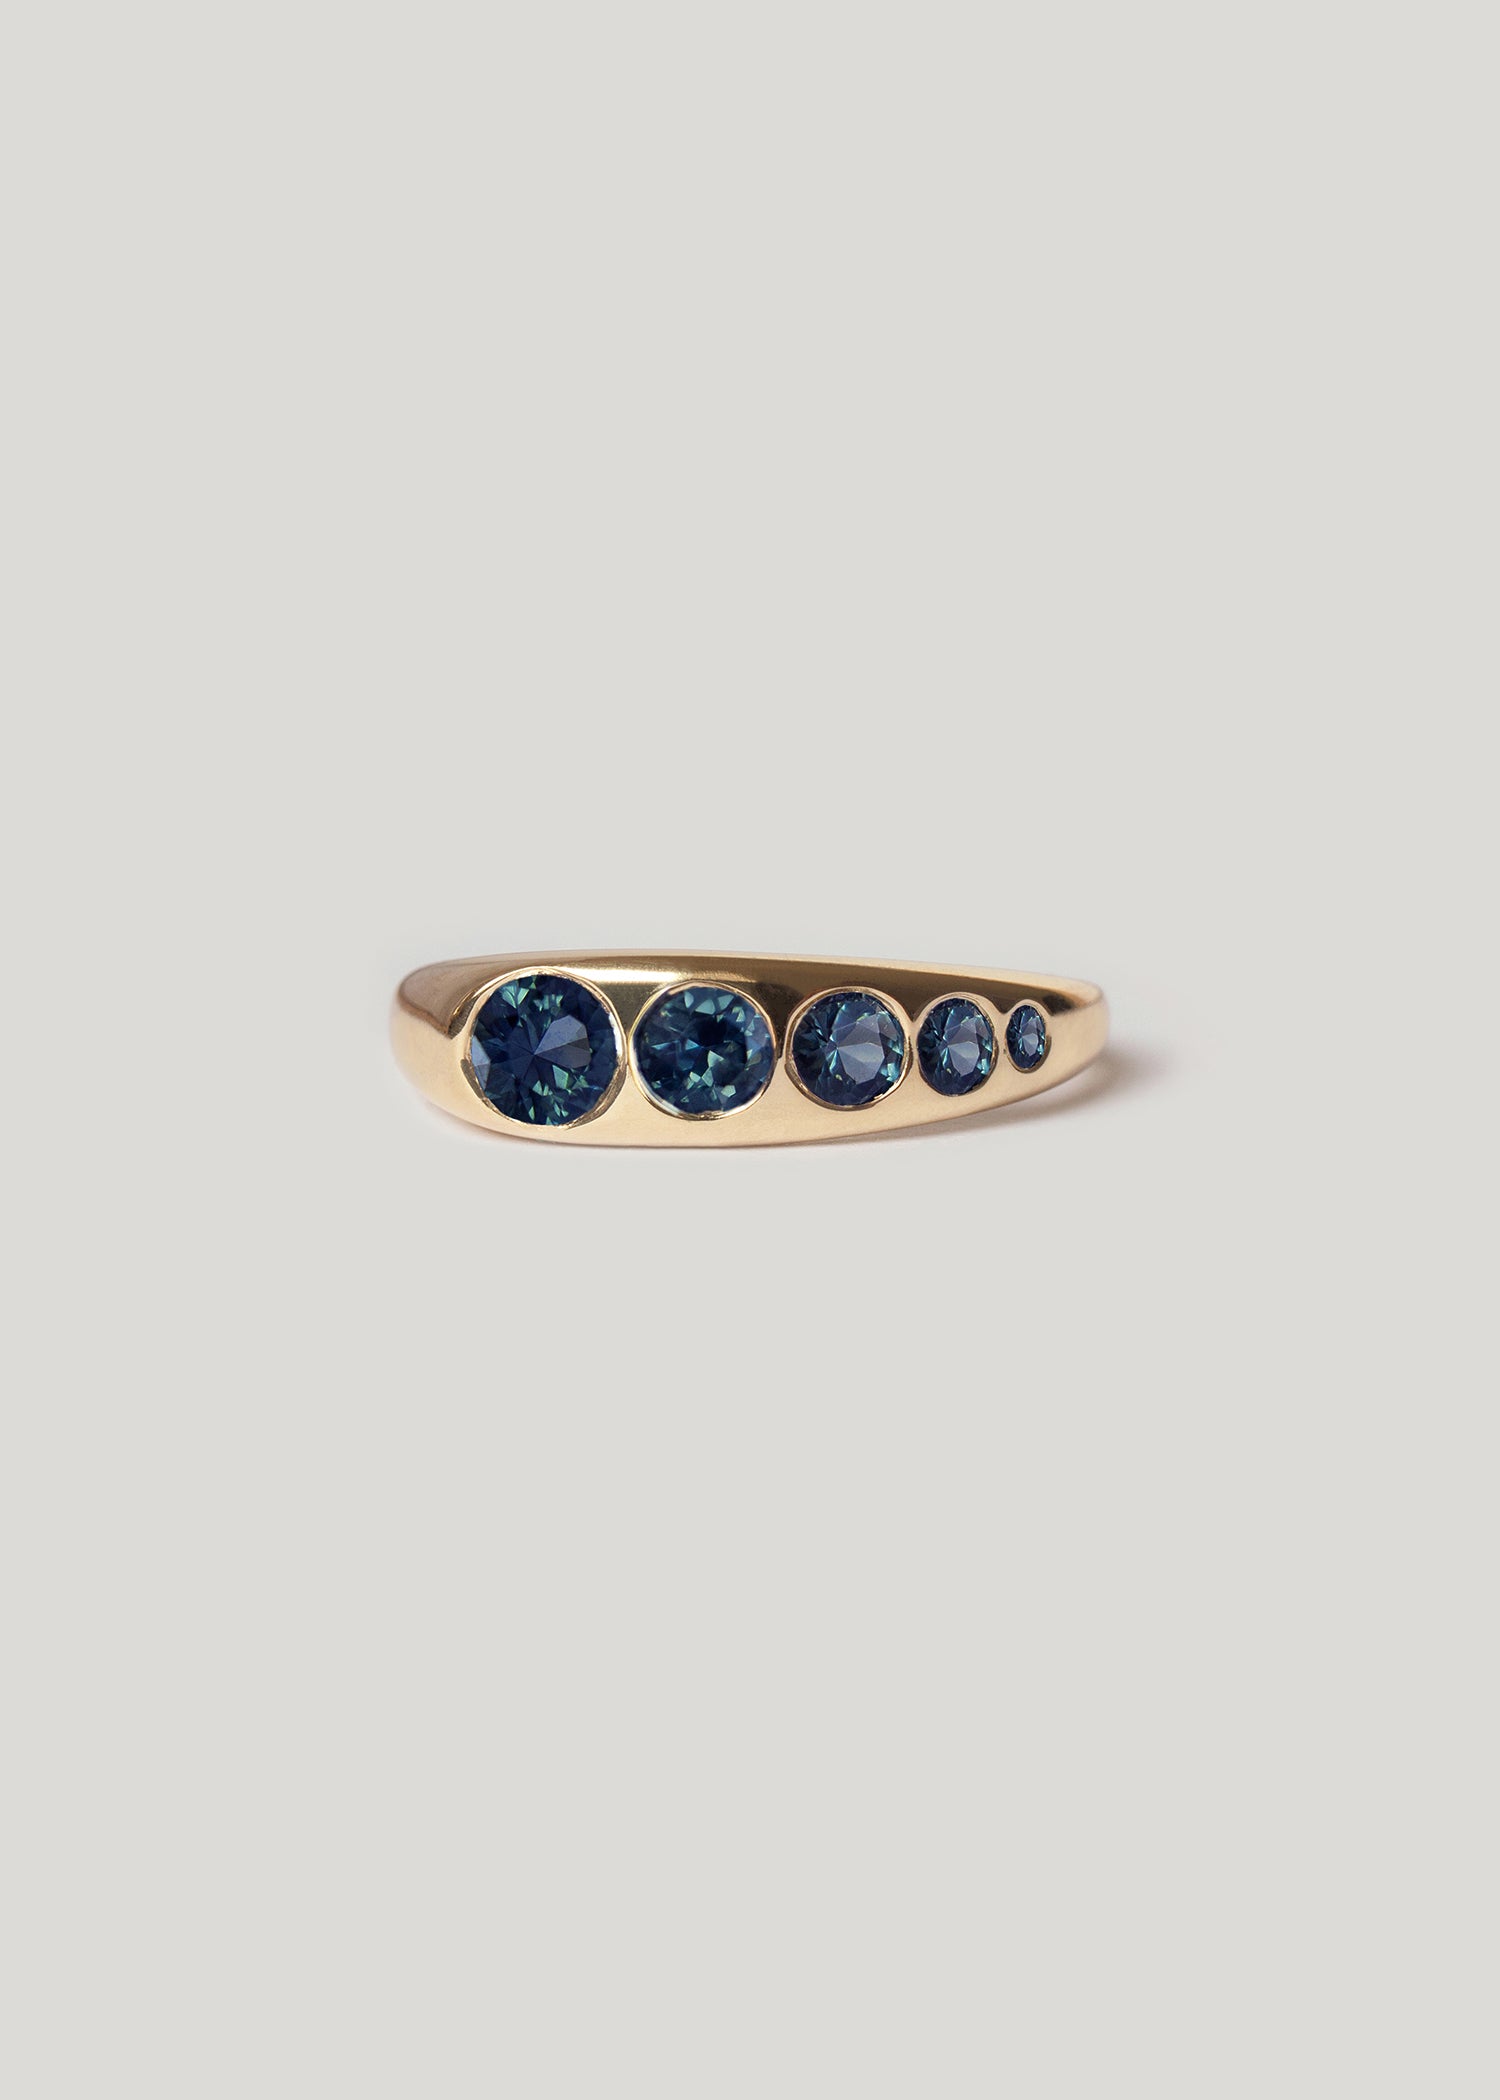 In Stock | Teal Sapphire Lila Suprima Ring